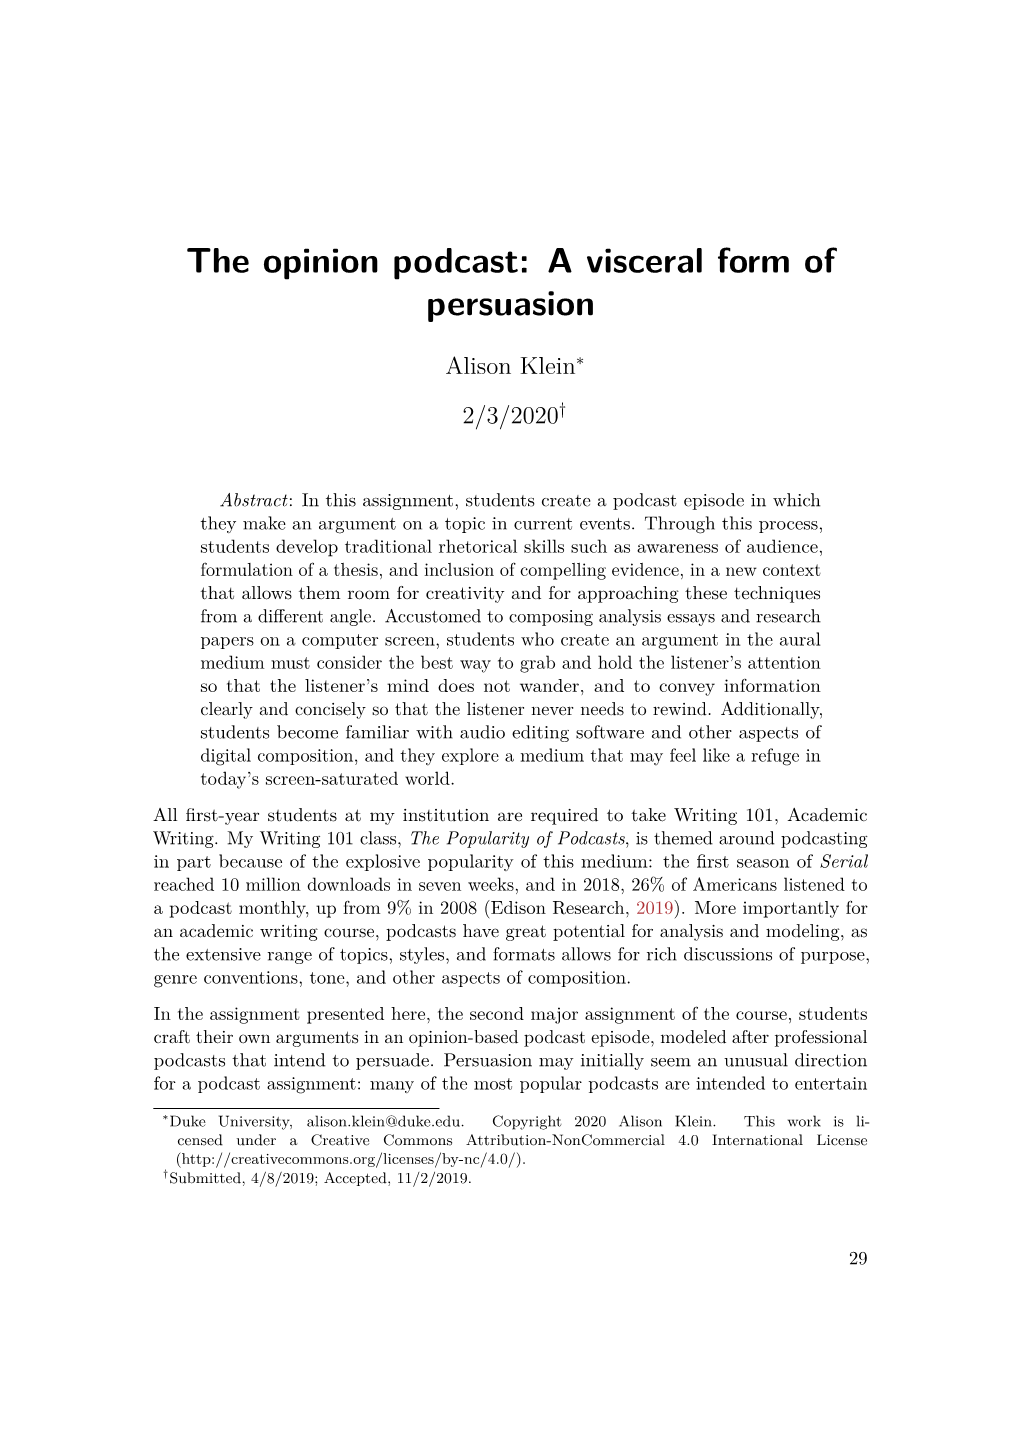 The Opinion Podcast: a Visceral Form of Persuasion